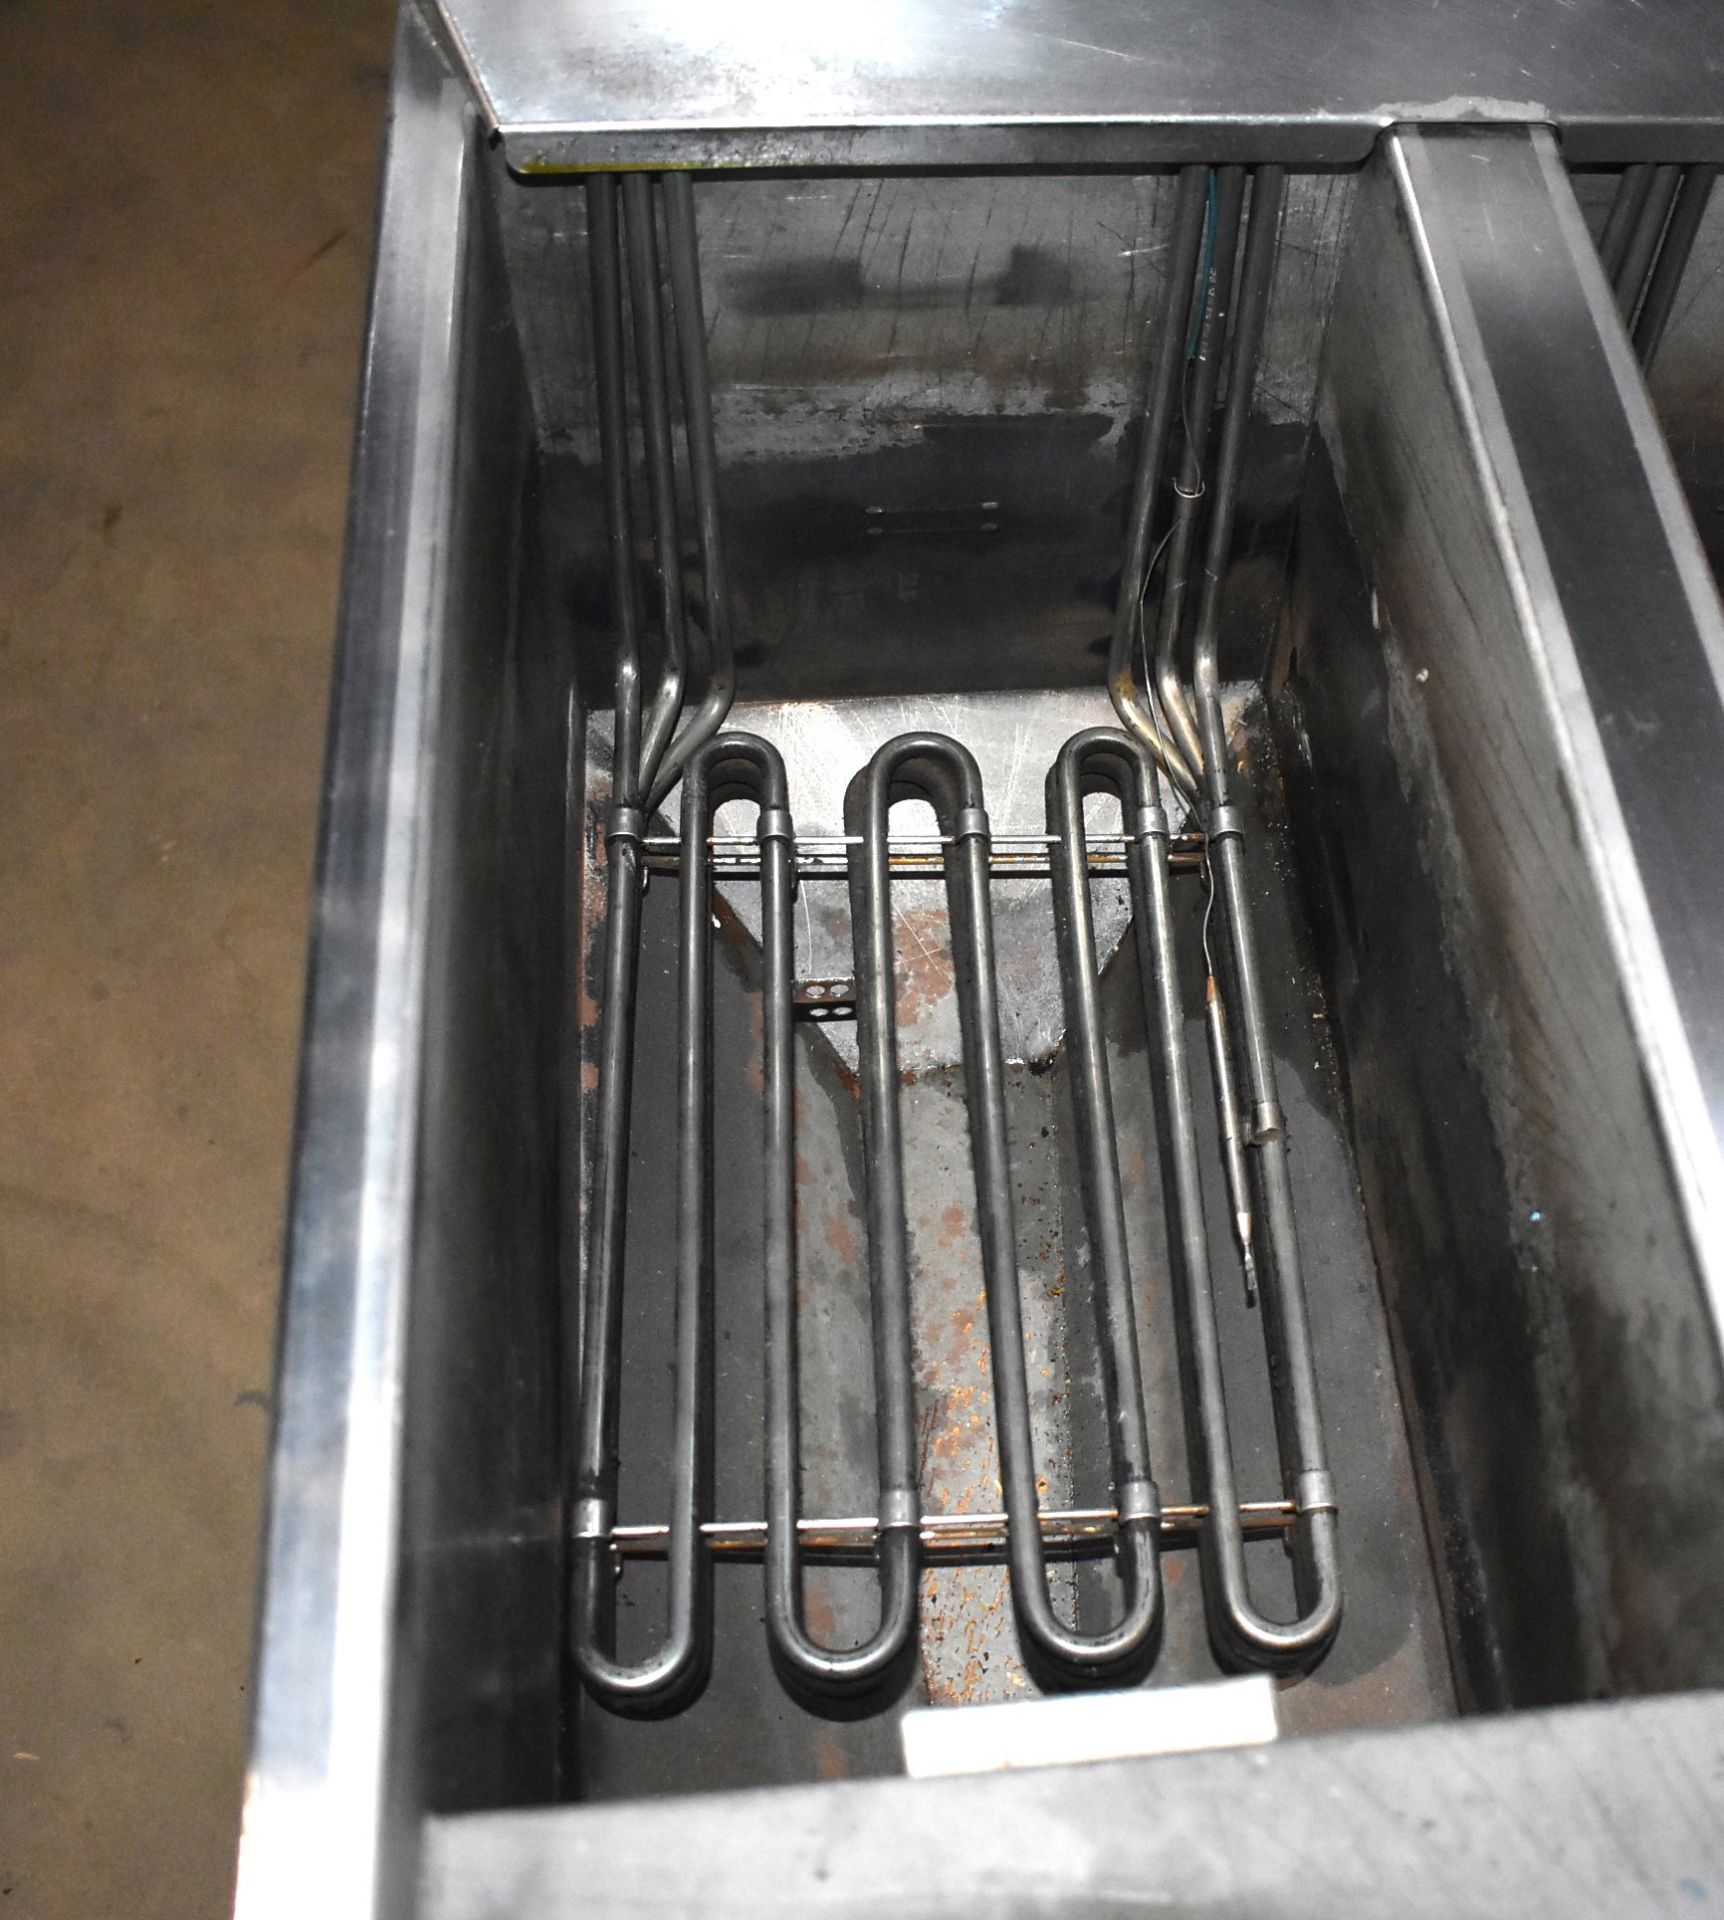 1 x Lincat Opus 700 Twin Tank Commercial Fryer - 3 Phase - Original RRP £3,700 - Recently Removed - Image 8 of 8